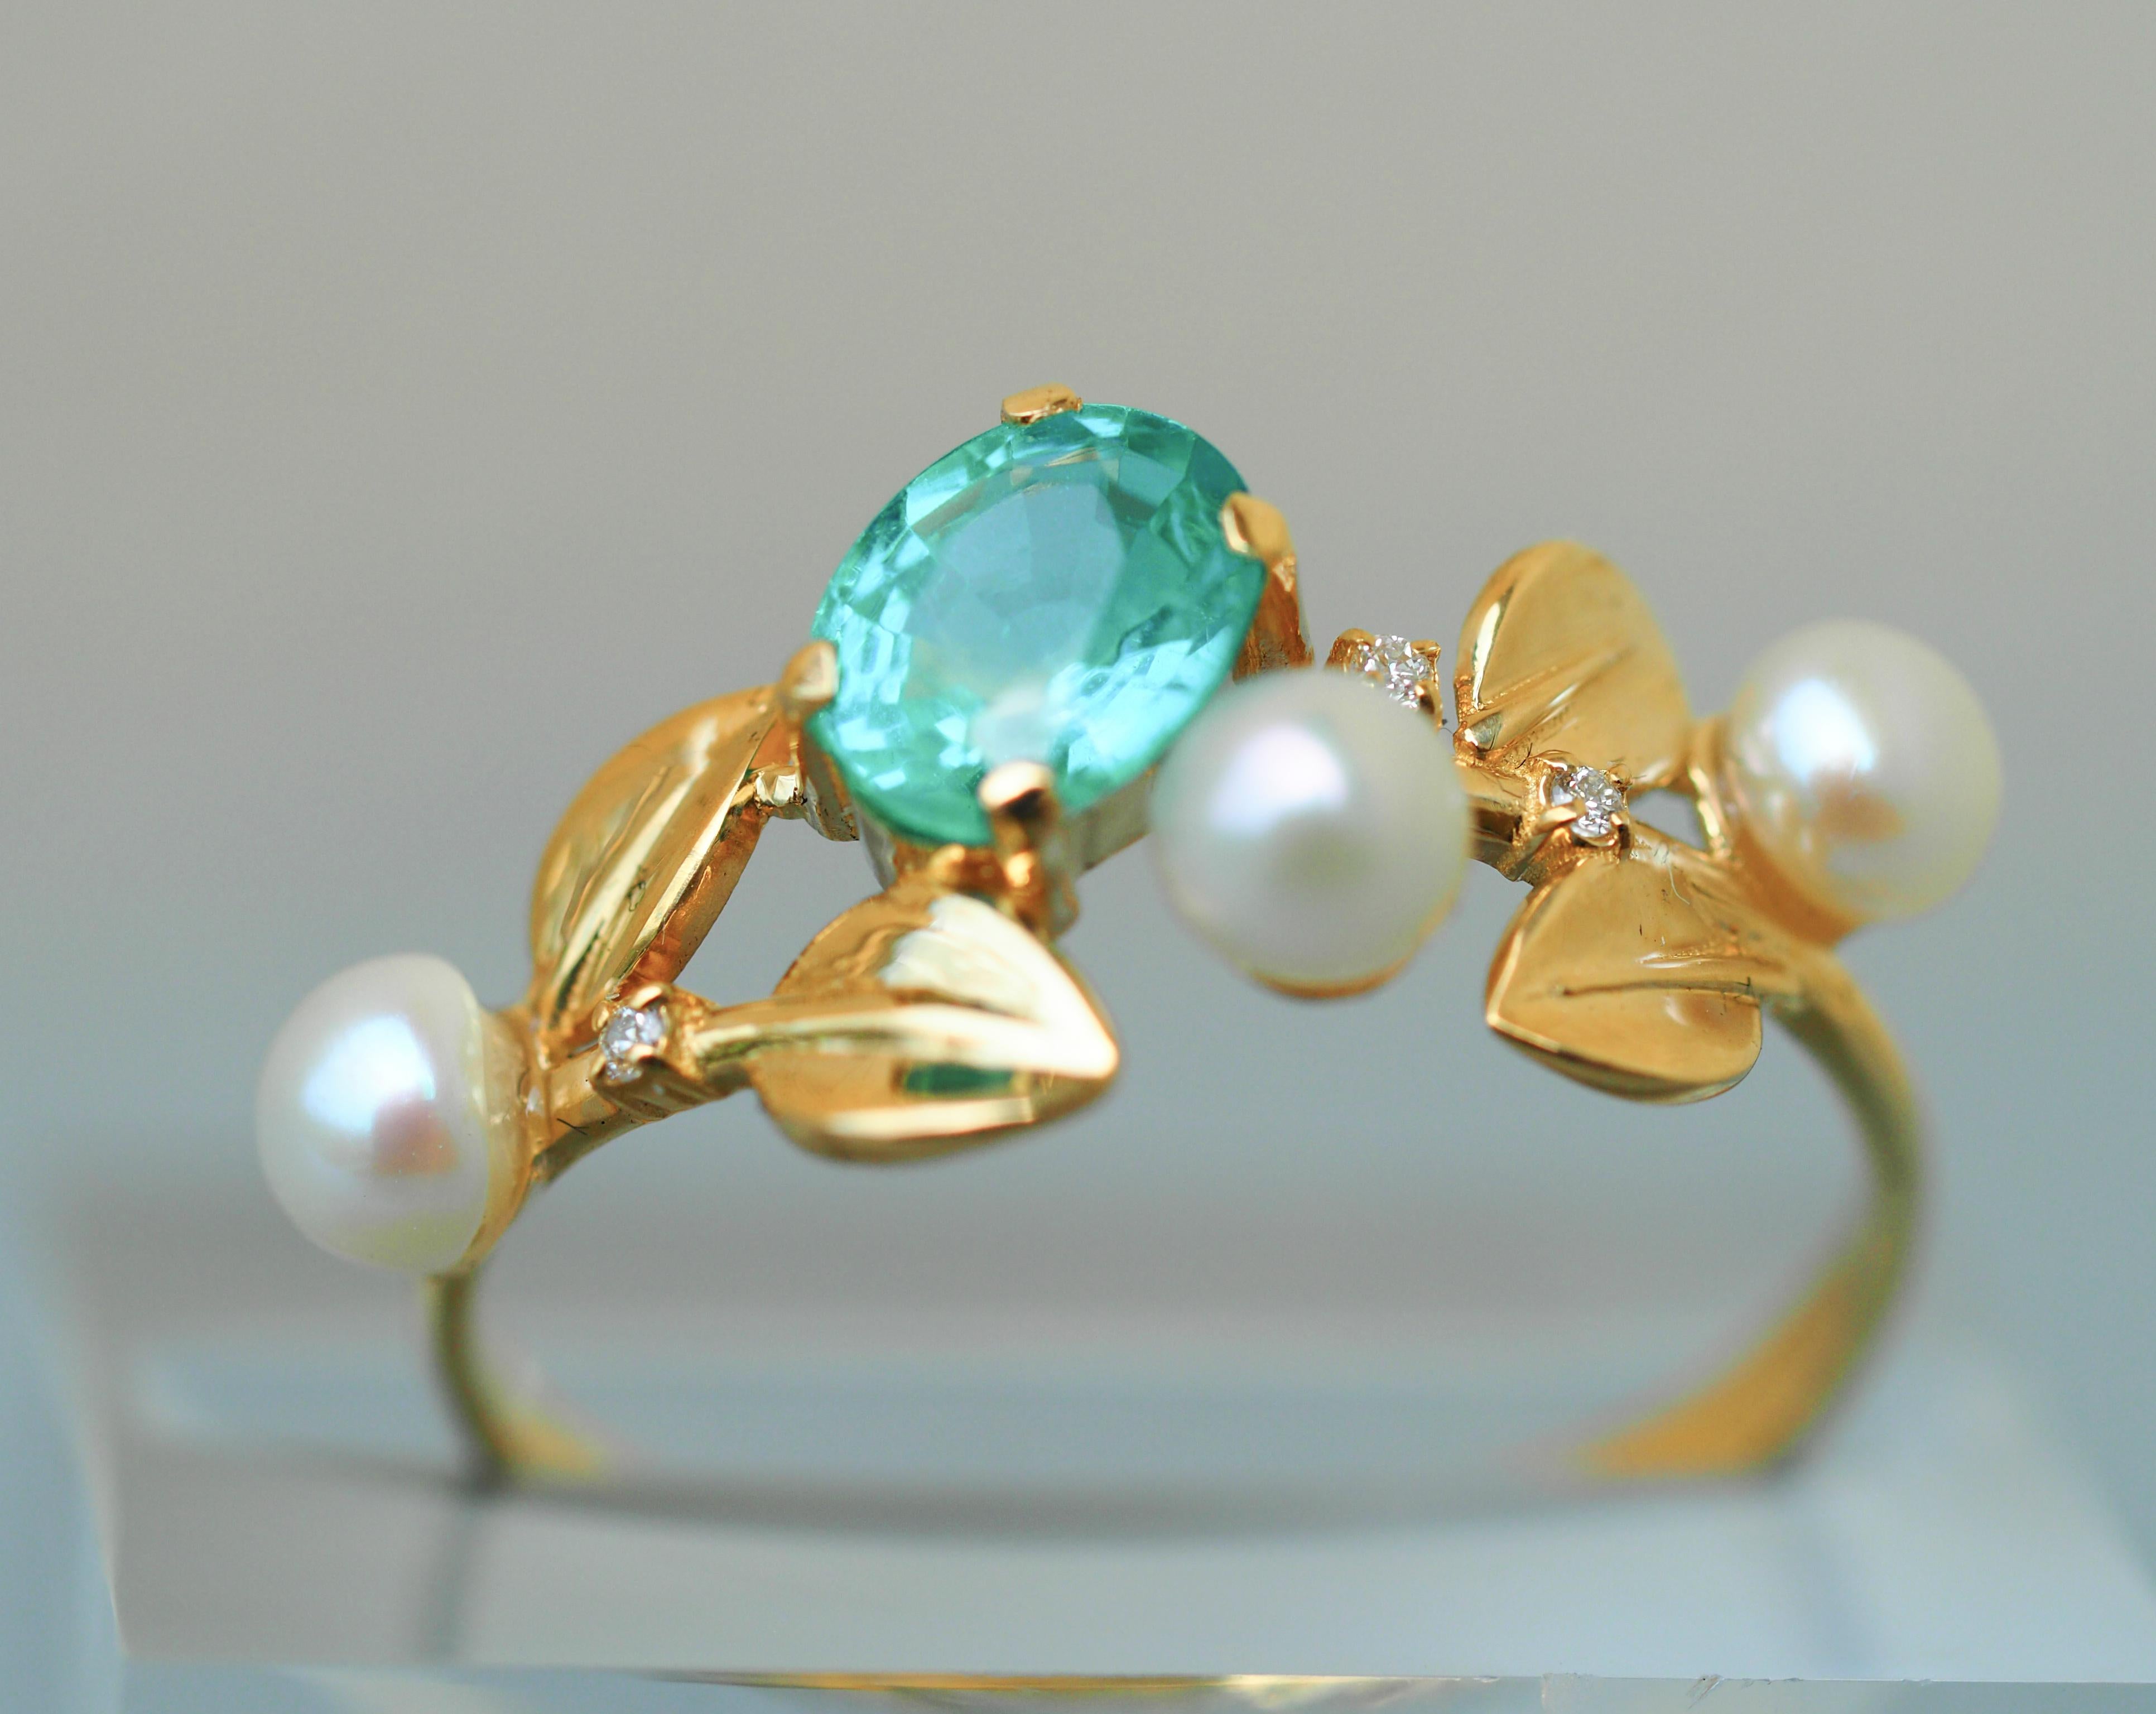 For Sale:  14k Gold Floral Ring with Oval Apatite, Diamonds and Pearls 2